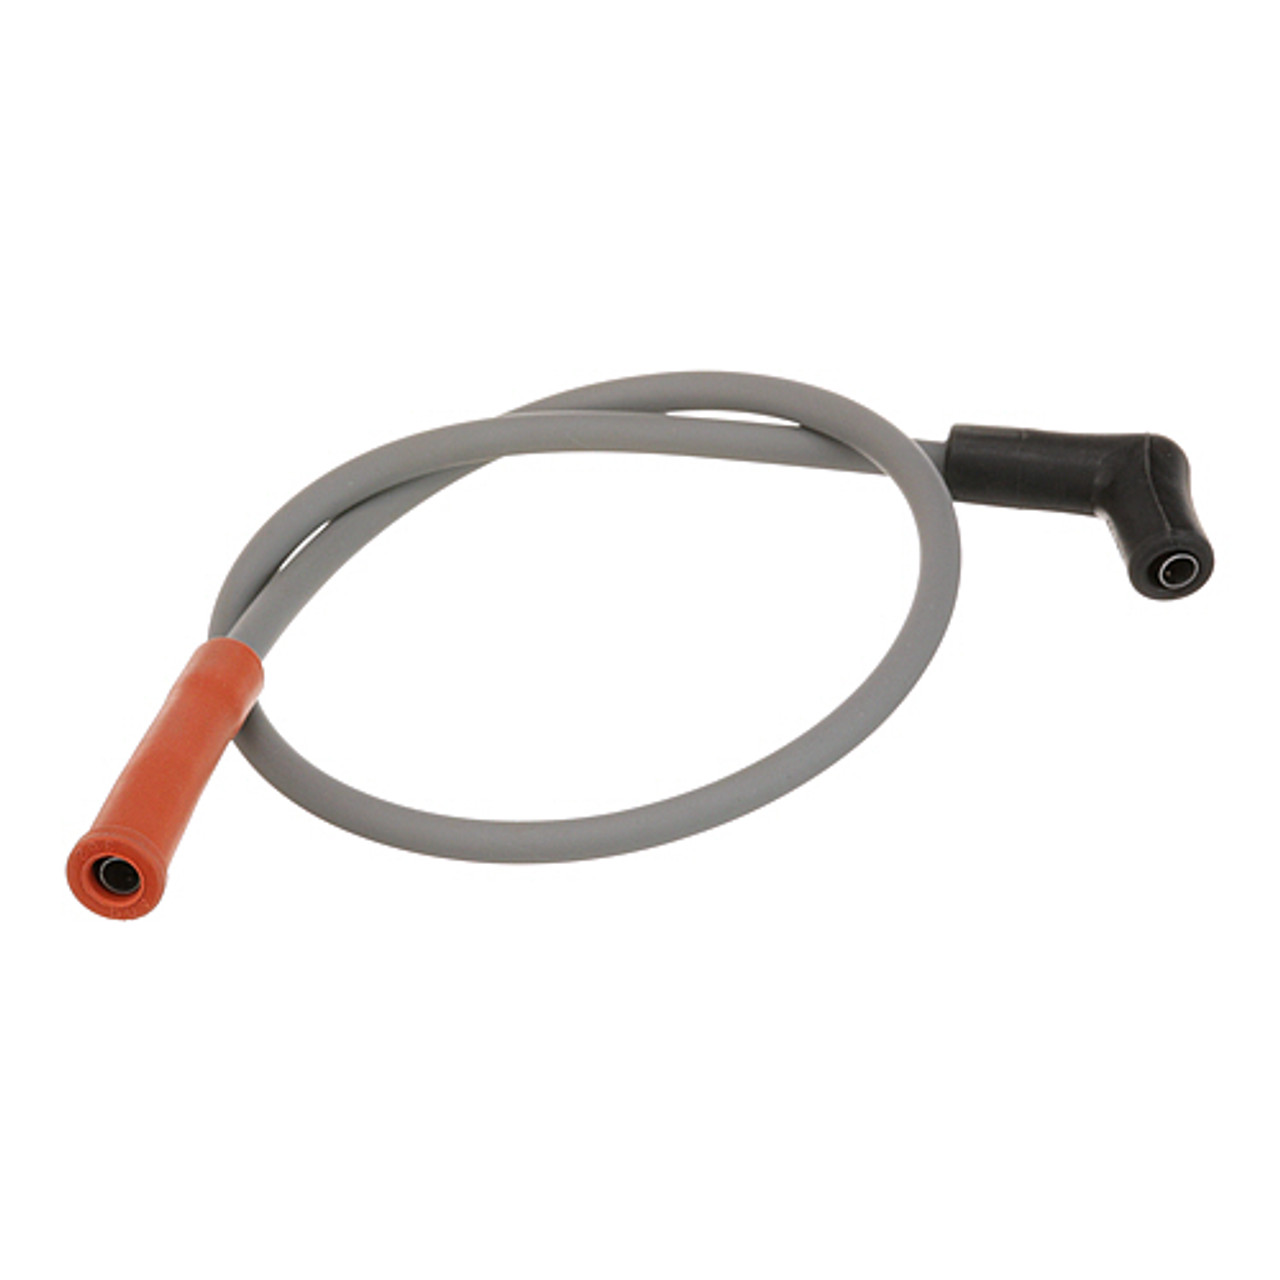 Ignition Cable, 27 Inch Long - Replacement Part For Frymaster FM807-1200